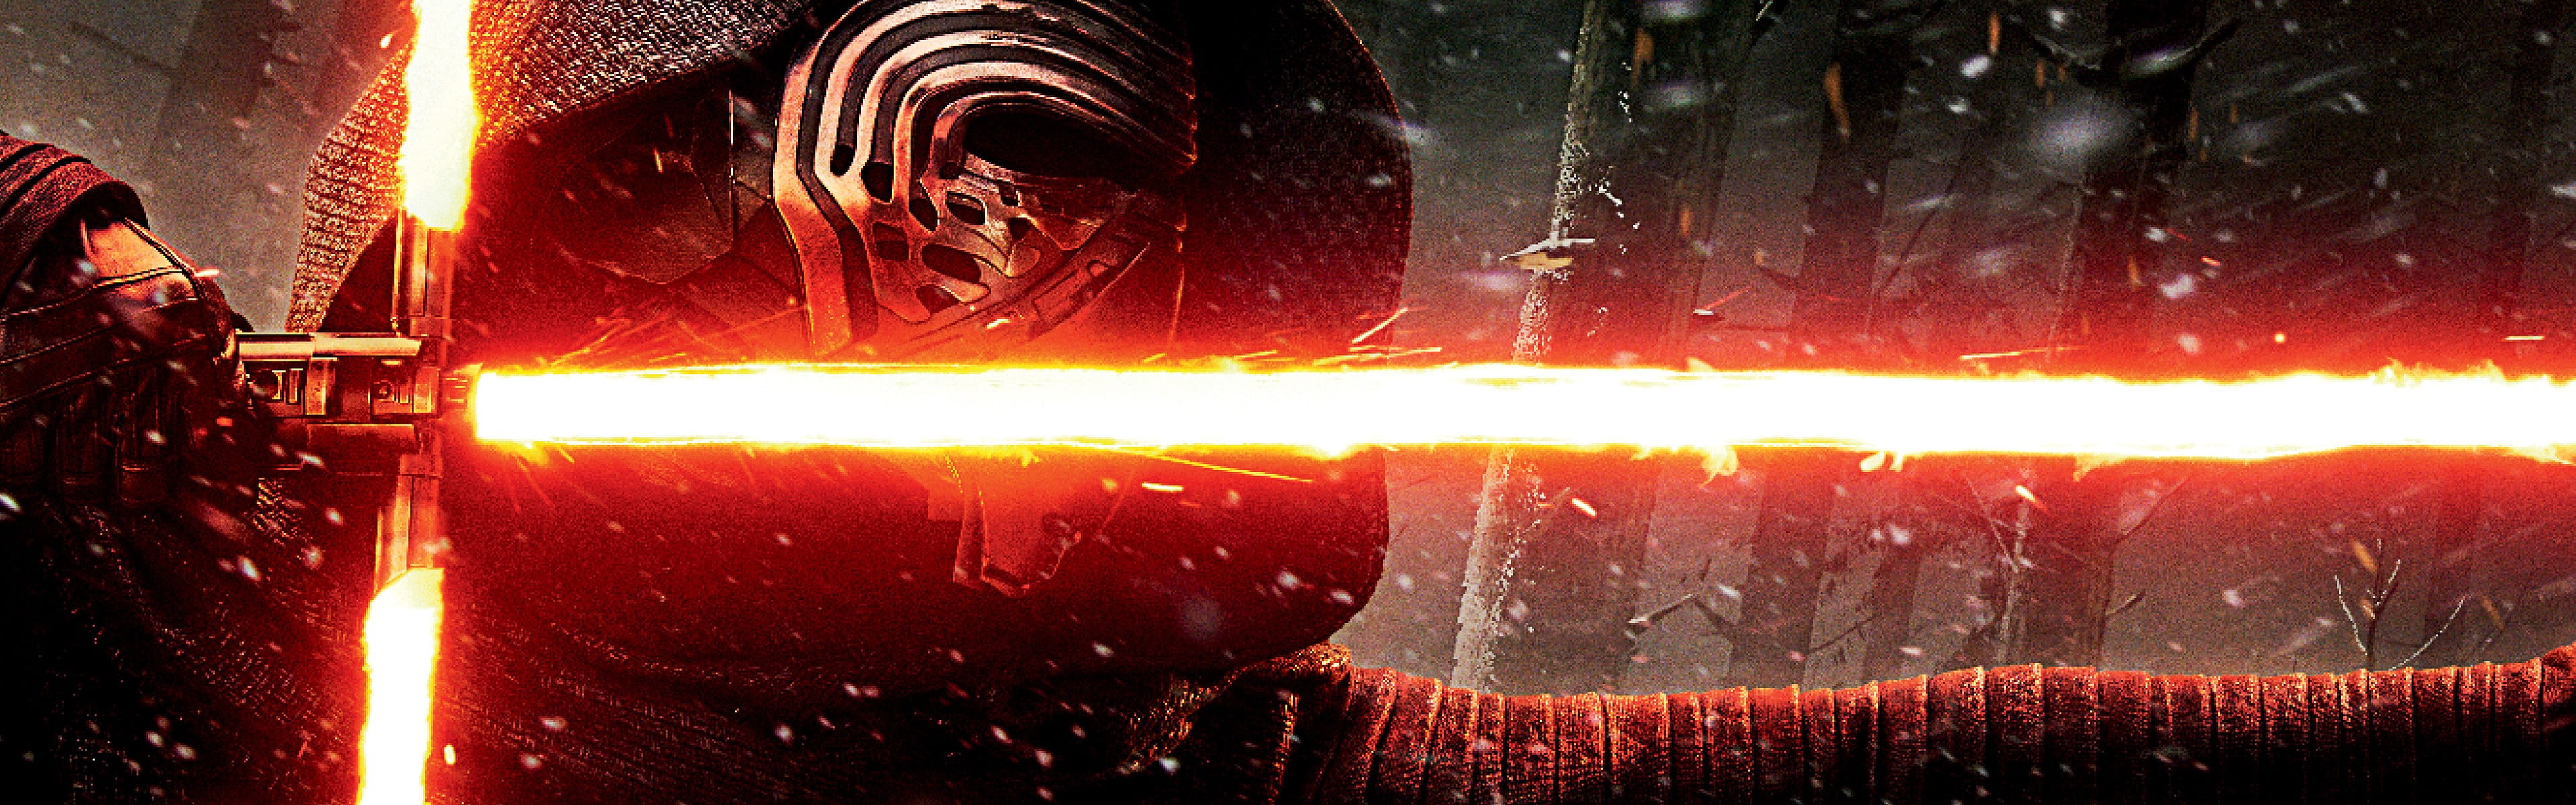 gray and red lightsaber, lightsaber, Kylo Ren, Star Wars: The Force Awakens, movies